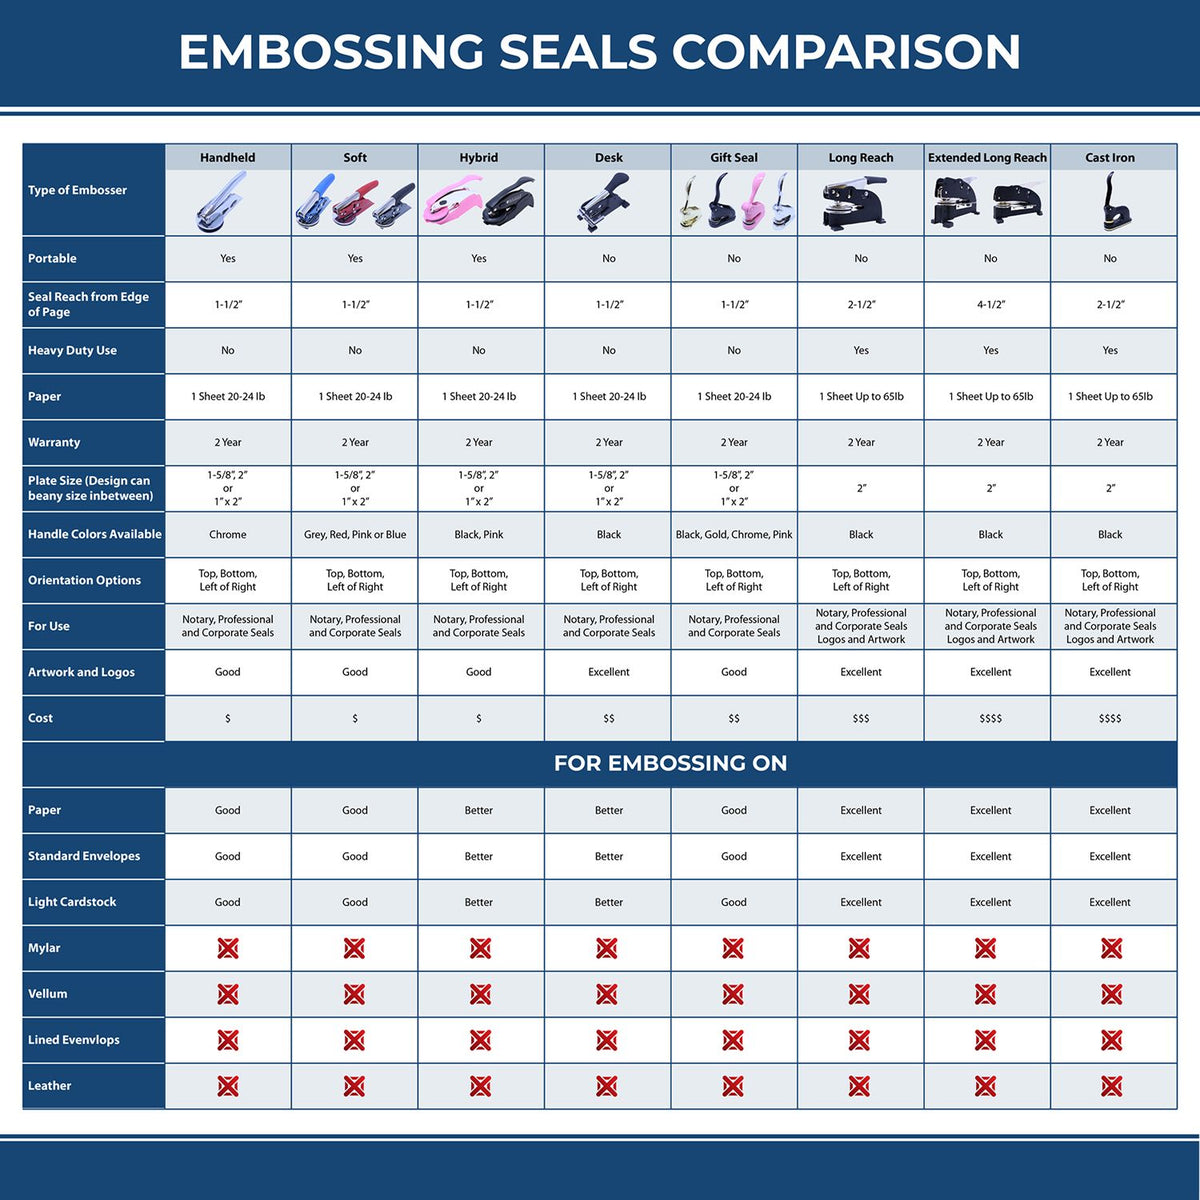 A comparison chart for the different types of mount models available for the Handheld Arizona Professional Engineer Embosser.